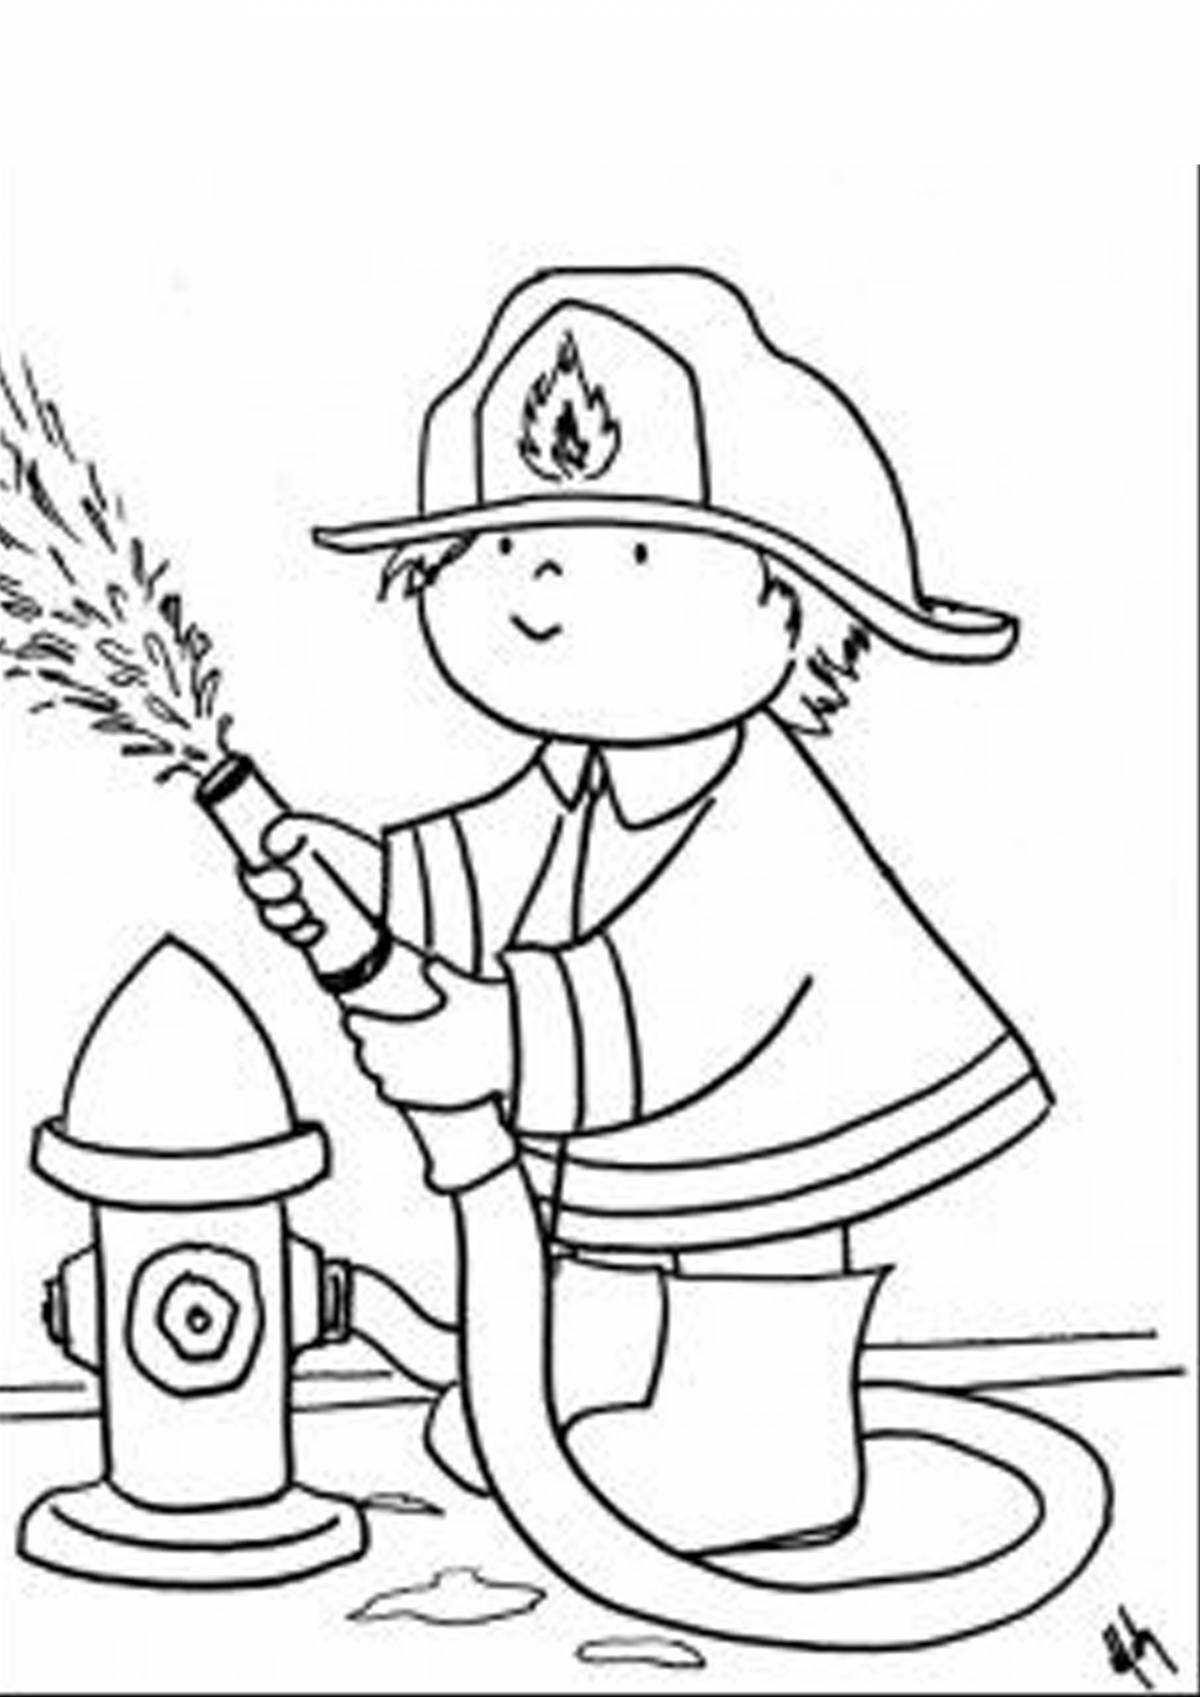 Fire safety educational coloring book for kindergarten